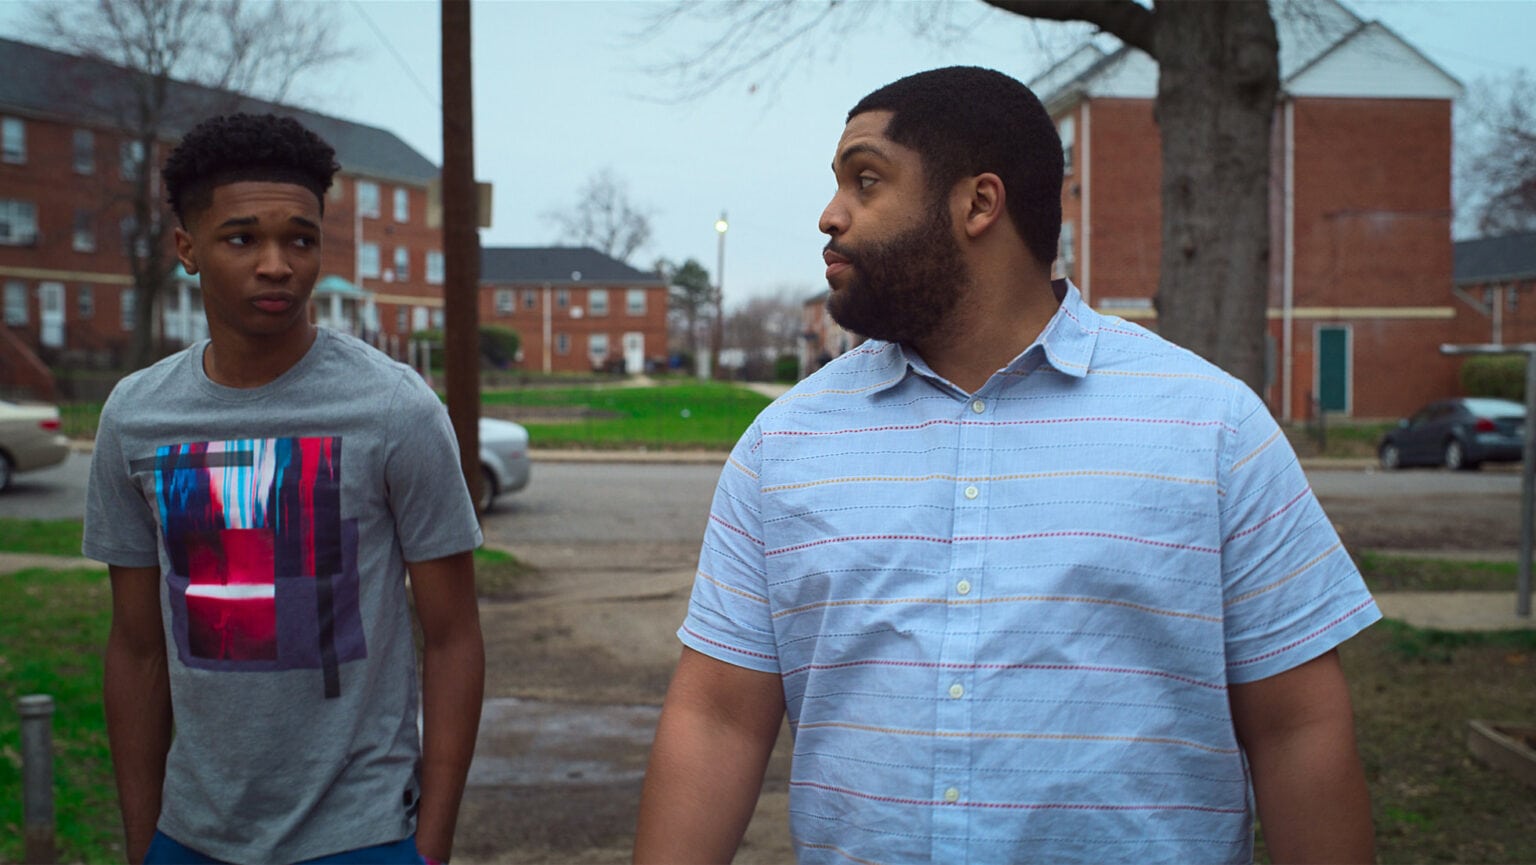 Isaiah Hill and O’Shea Jackson Jr. in Swagger, premiering globally October 29, 2021 on Apple TV+.